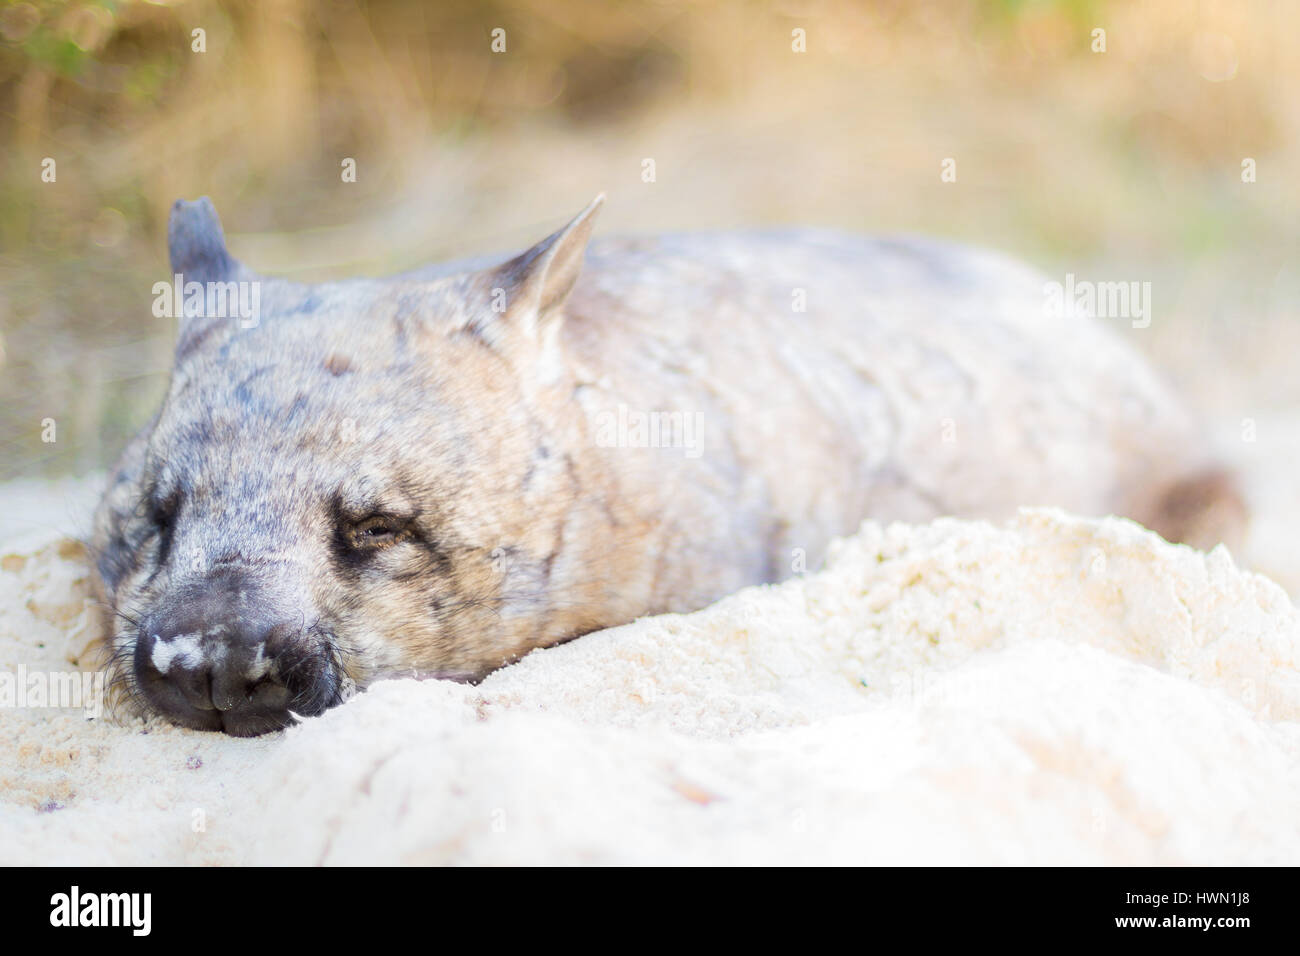 Southern Hairy-nosed wombat Stock Photo